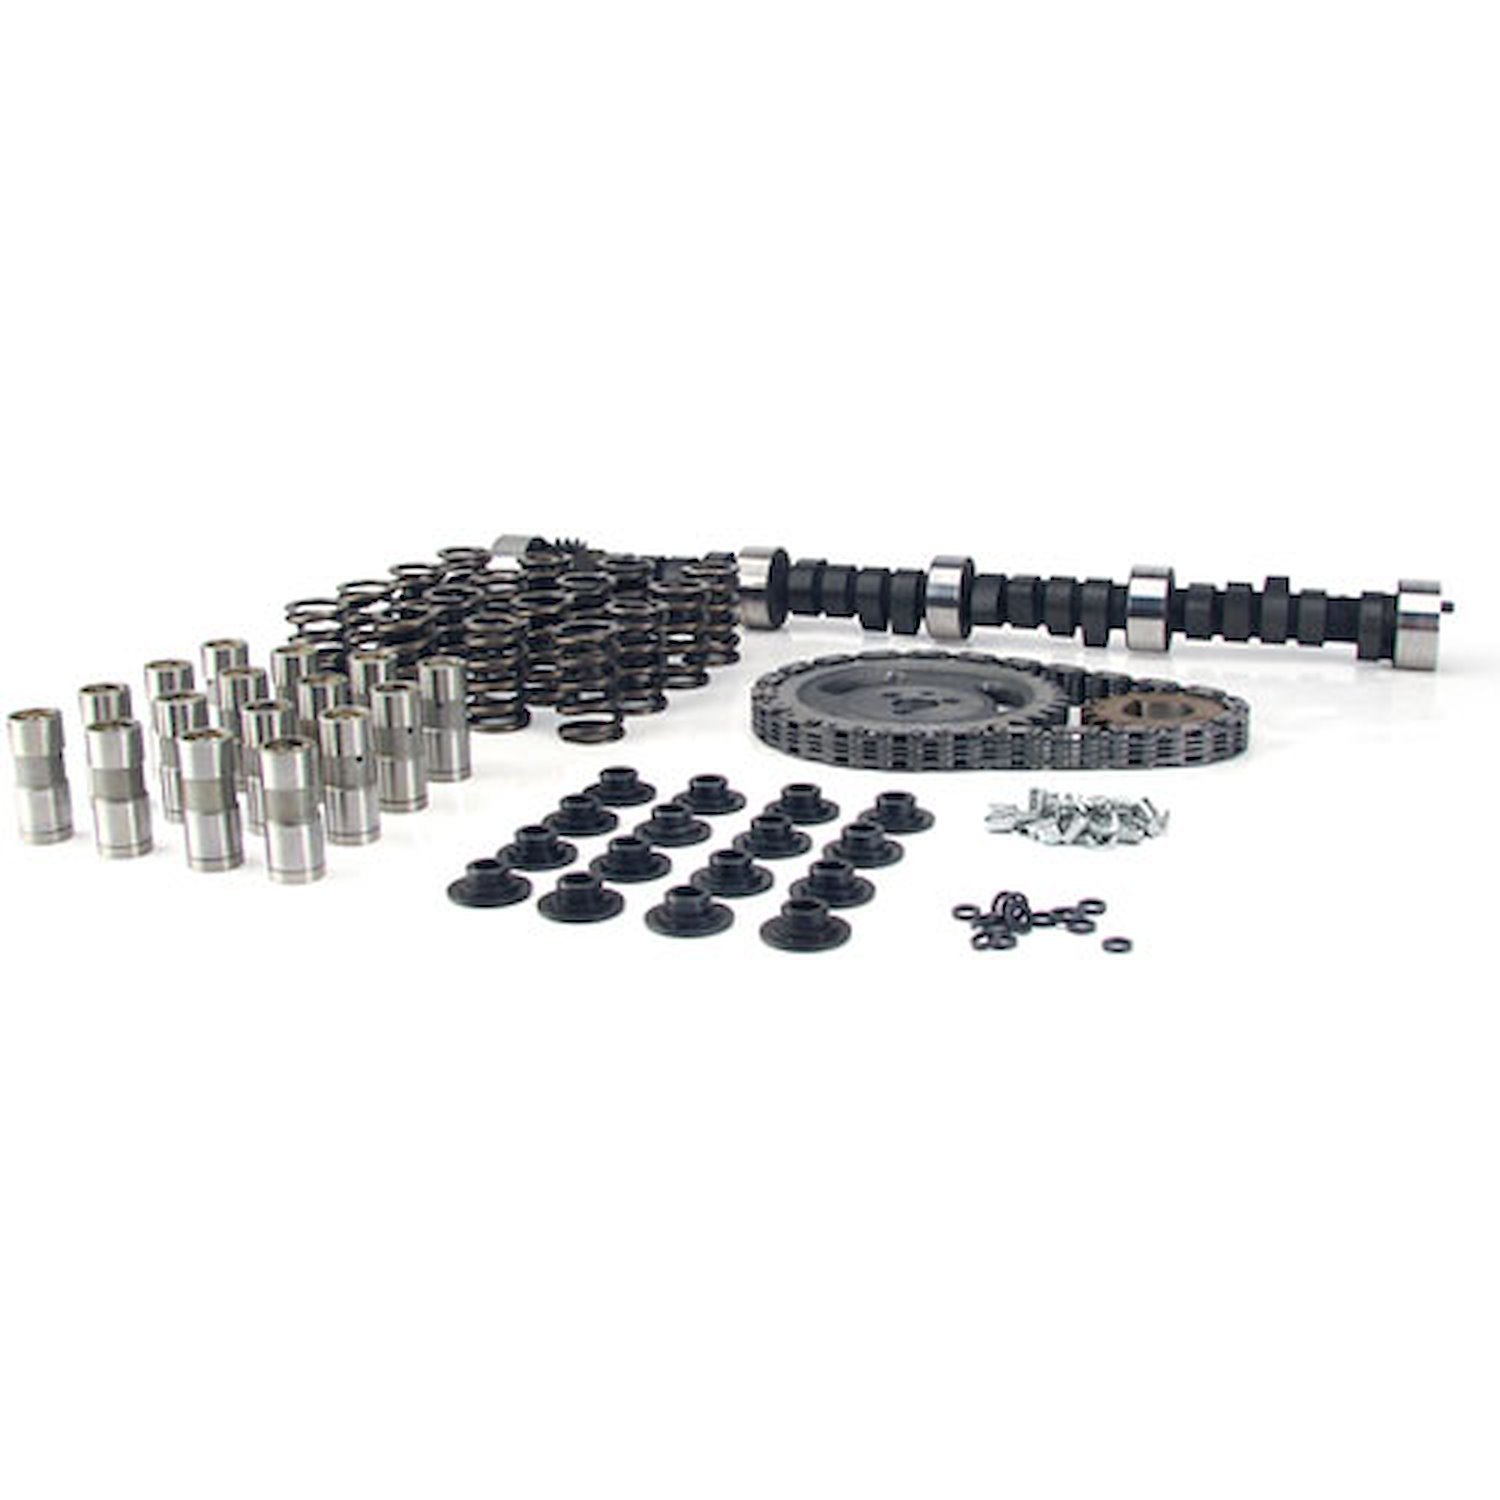 Xtreme Energy 268H Hydraulic Flat Tappet Camshaft Complete Kit Lift: .477"/.480" Duration: 268°/280° RPM Range: 1600-5800